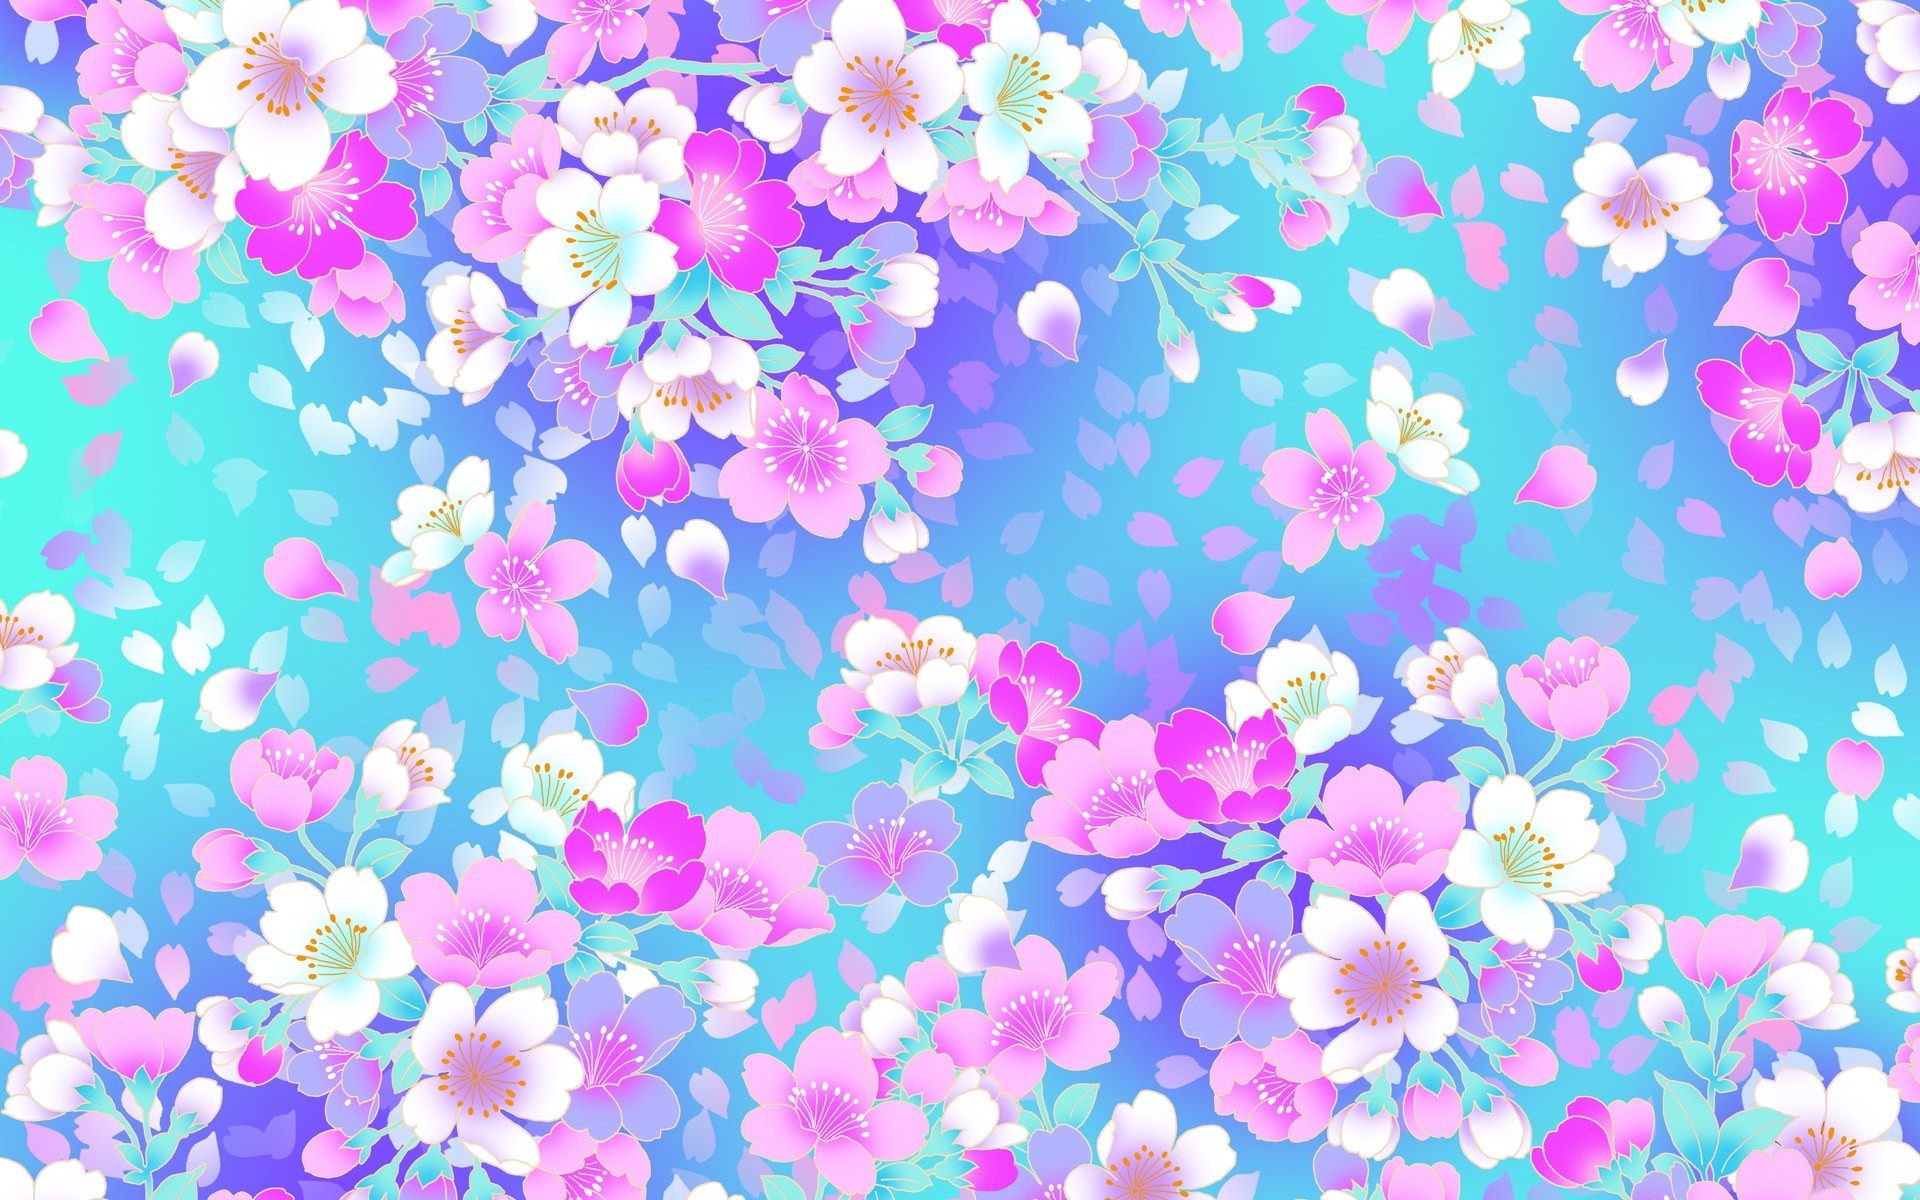 Girly wallpaper ·① Download free cool HD backgrounds for ...